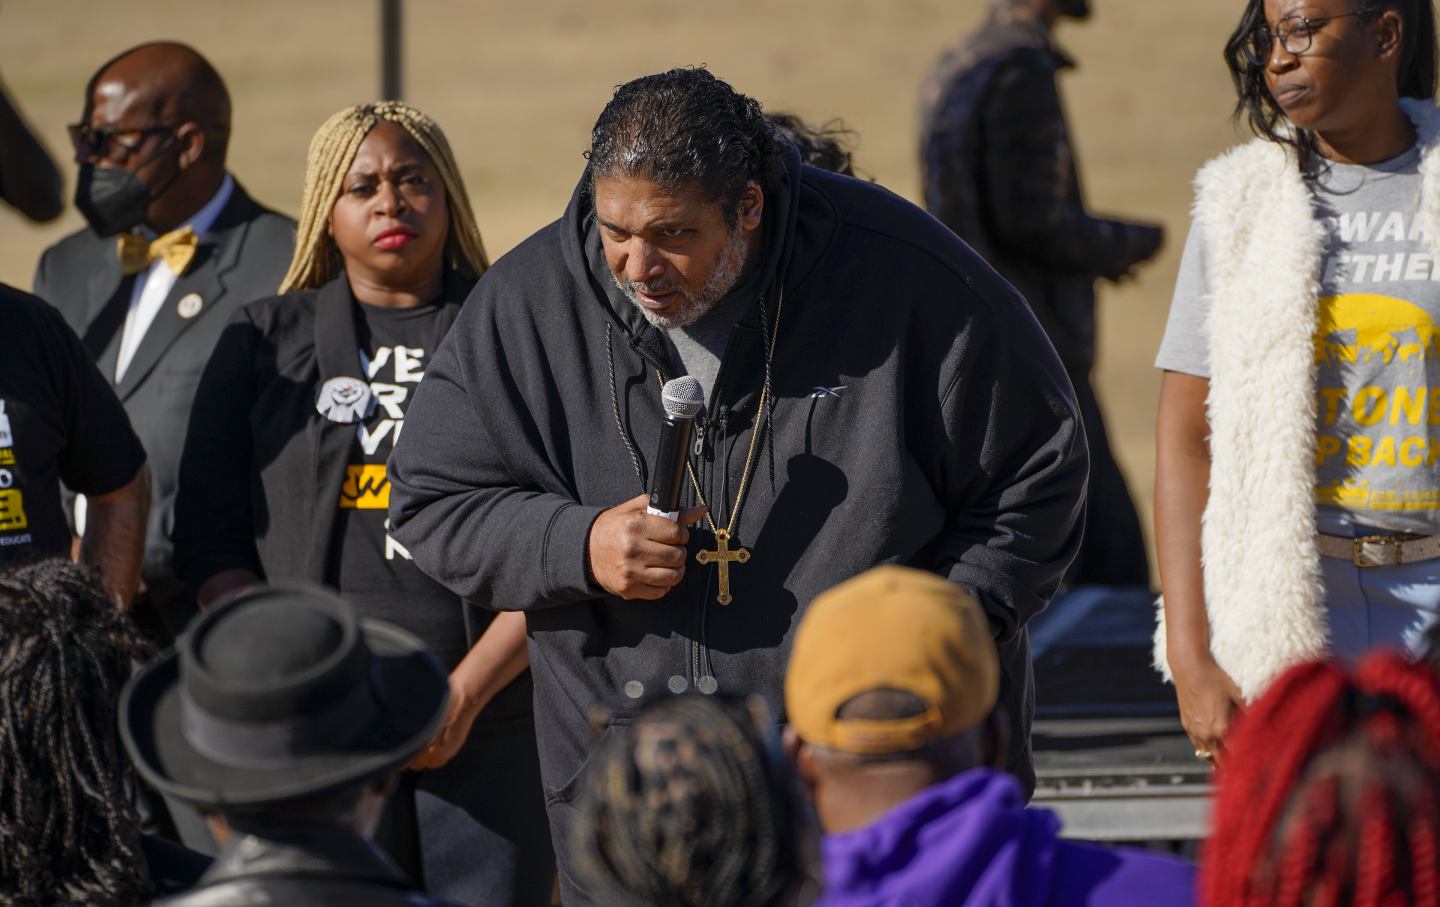 The Rev. William J. Barber II speaks during an early voting rally near a polling location in Columbus, Ga., on Sunday, November 27, 2022.